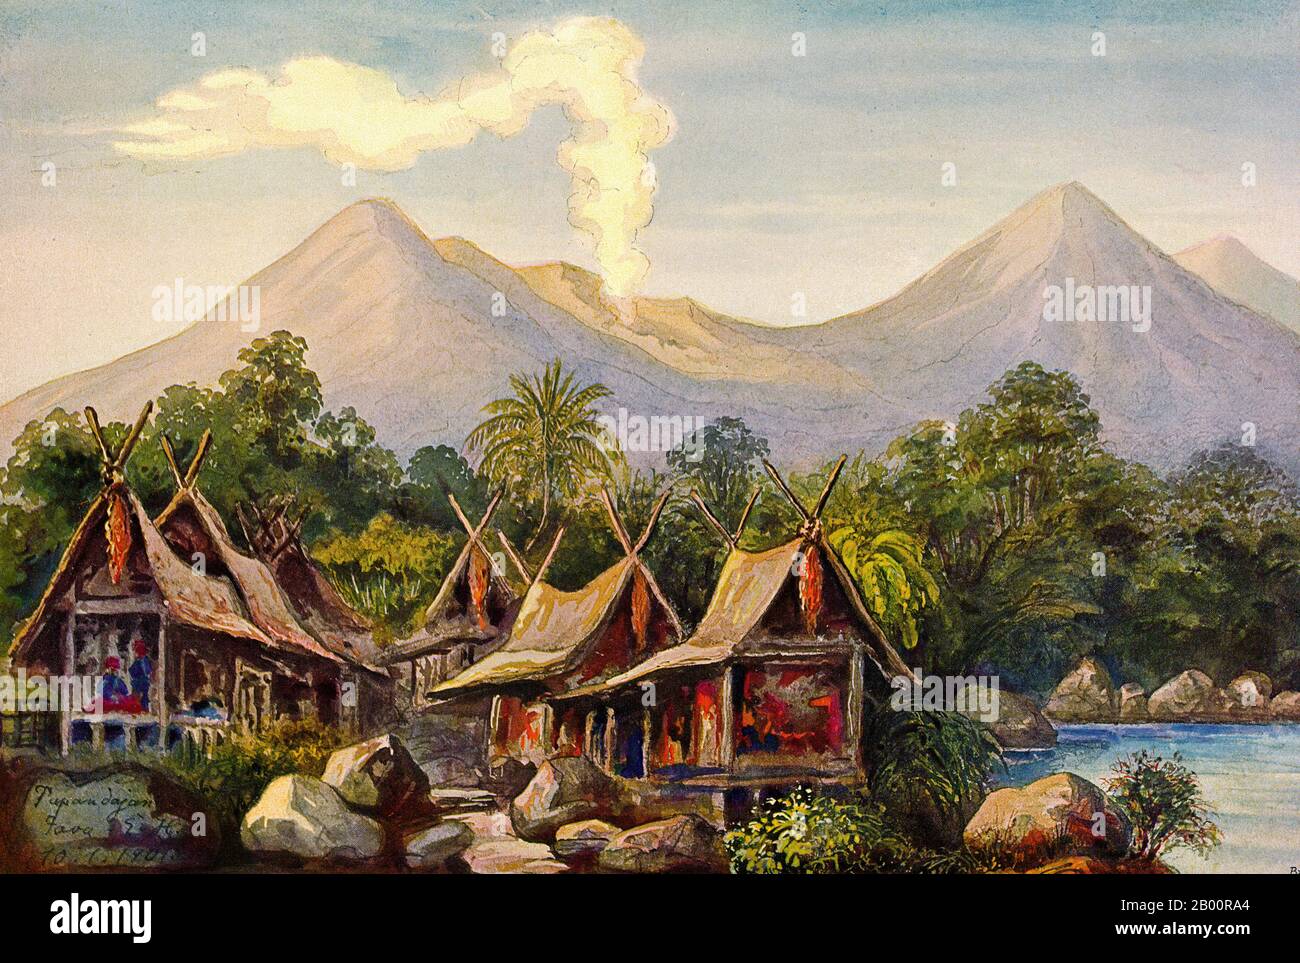 Indonesia/Germany: 'Papandayan Volcano, Java'. Watercolour painting by the German scientist and traveller Ernst Haeckel (1834-1919), 1901.  Ernst Heinrich Philipp August Haeckel (February 16, 1834 – August 9, 1919), also written von Haeckel, was an eminent German biologist, naturalist, philosopher, physician, professor and artist who discovered, described and named thousands of new species, mapped a genealogical tree relating all life forms, and coined many terms in biology, including anthropogeny, ecology, phylum, phylogeny, and the kingdom Protista. Stock Photo